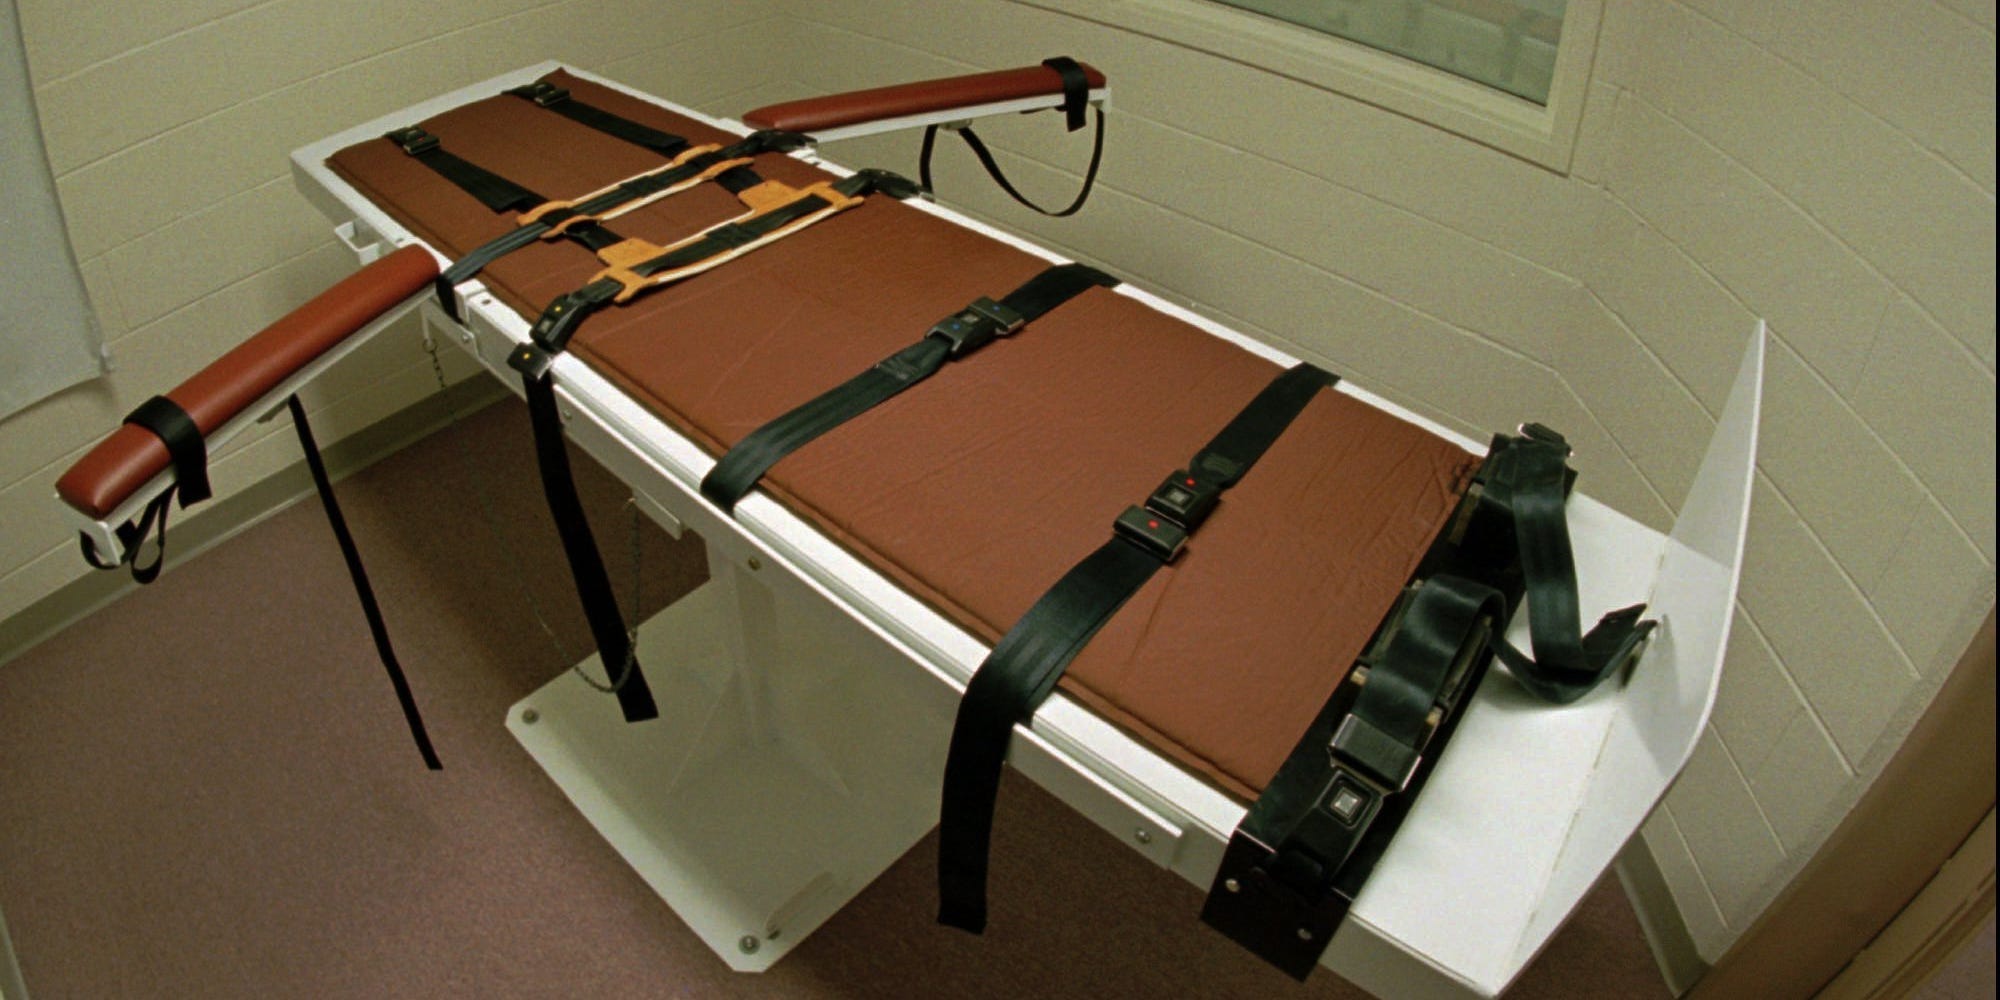 South Carolina Officials May Soon Force Death Row Inmates To Decide If They Want To Be Executed